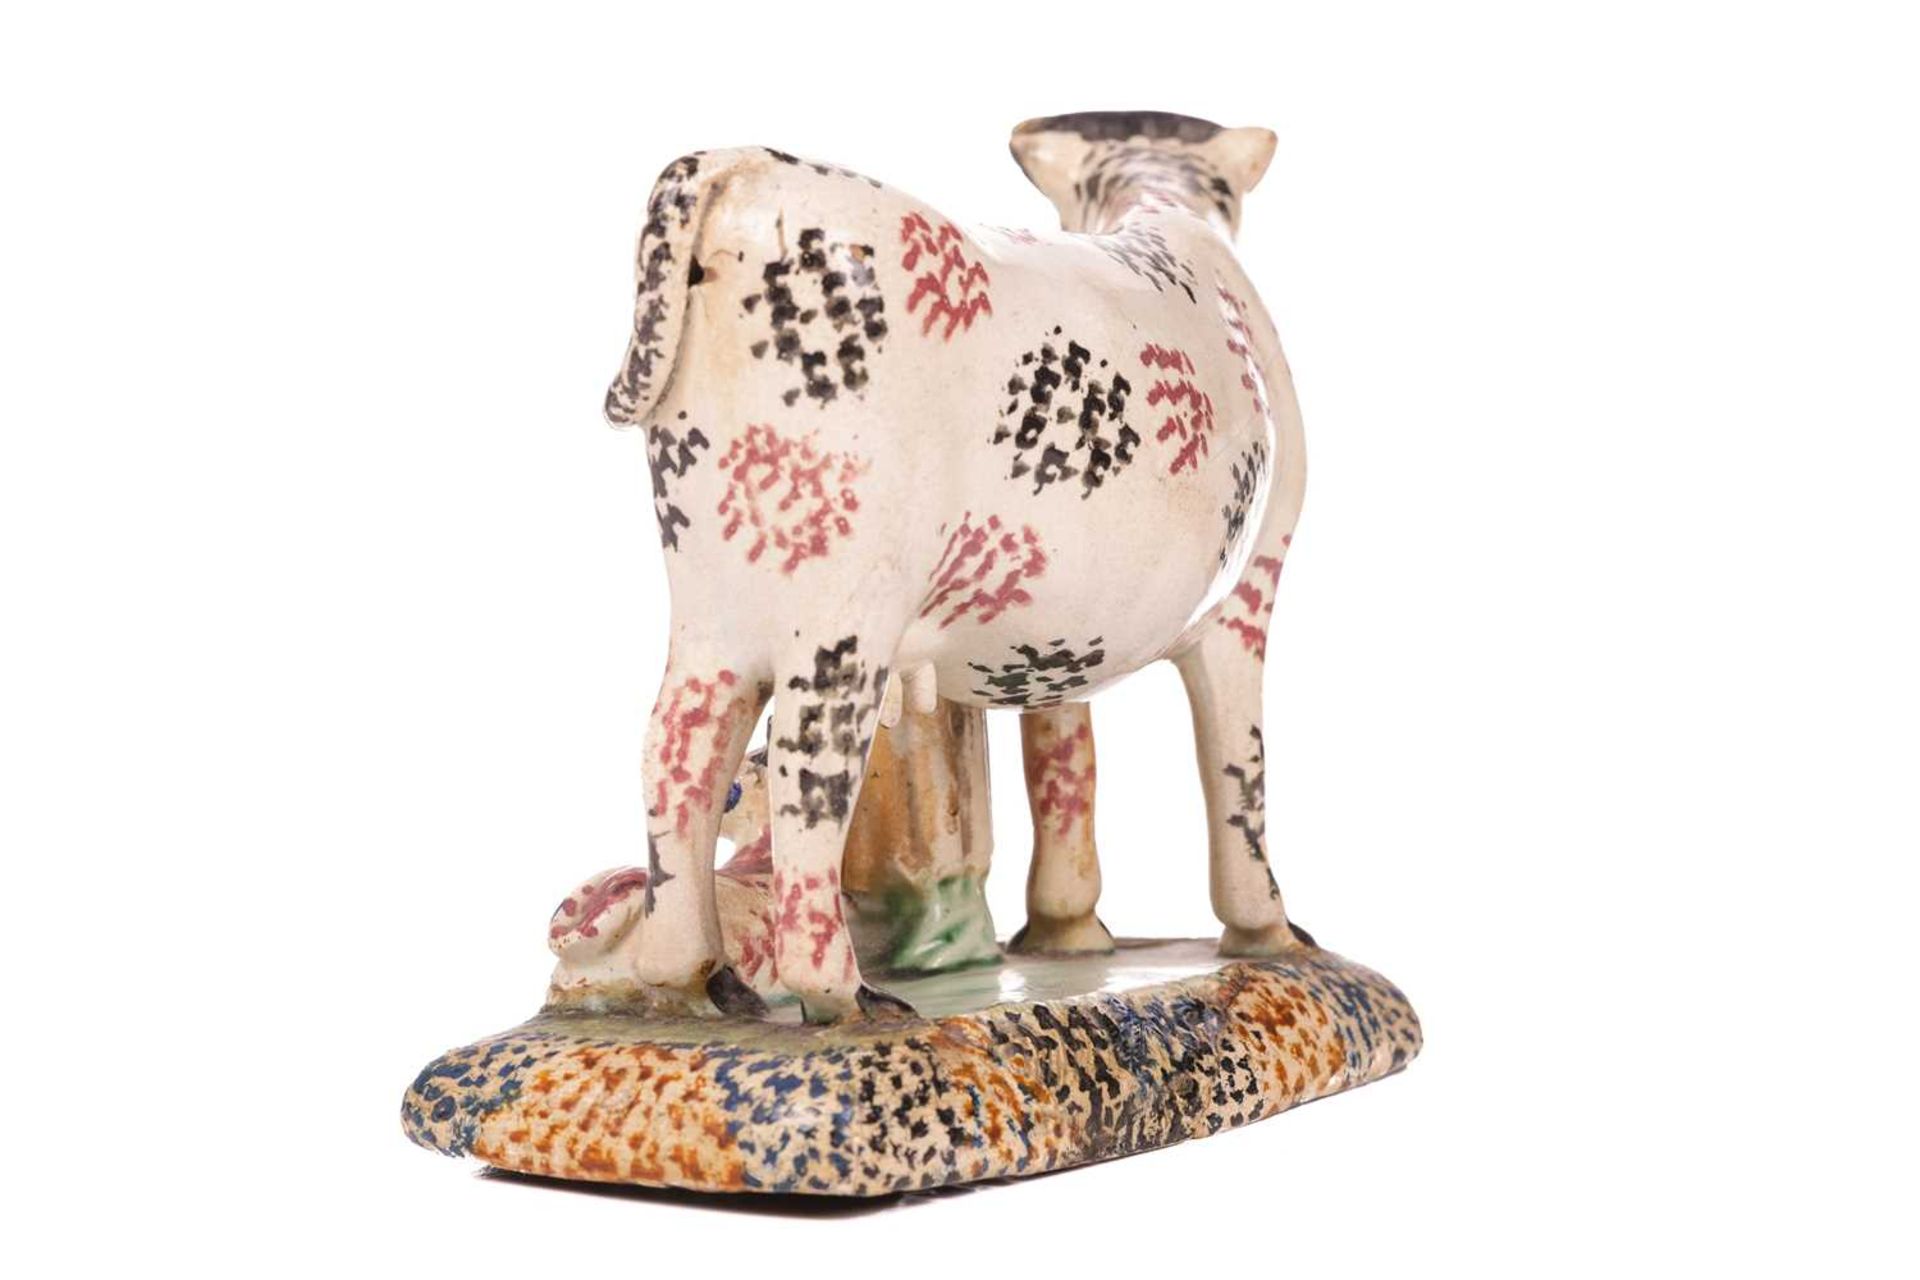 An early 19th-century Prattware ceramic cow, milkmaid and calf figure, circa 1810 with sponged decor - Image 7 of 7